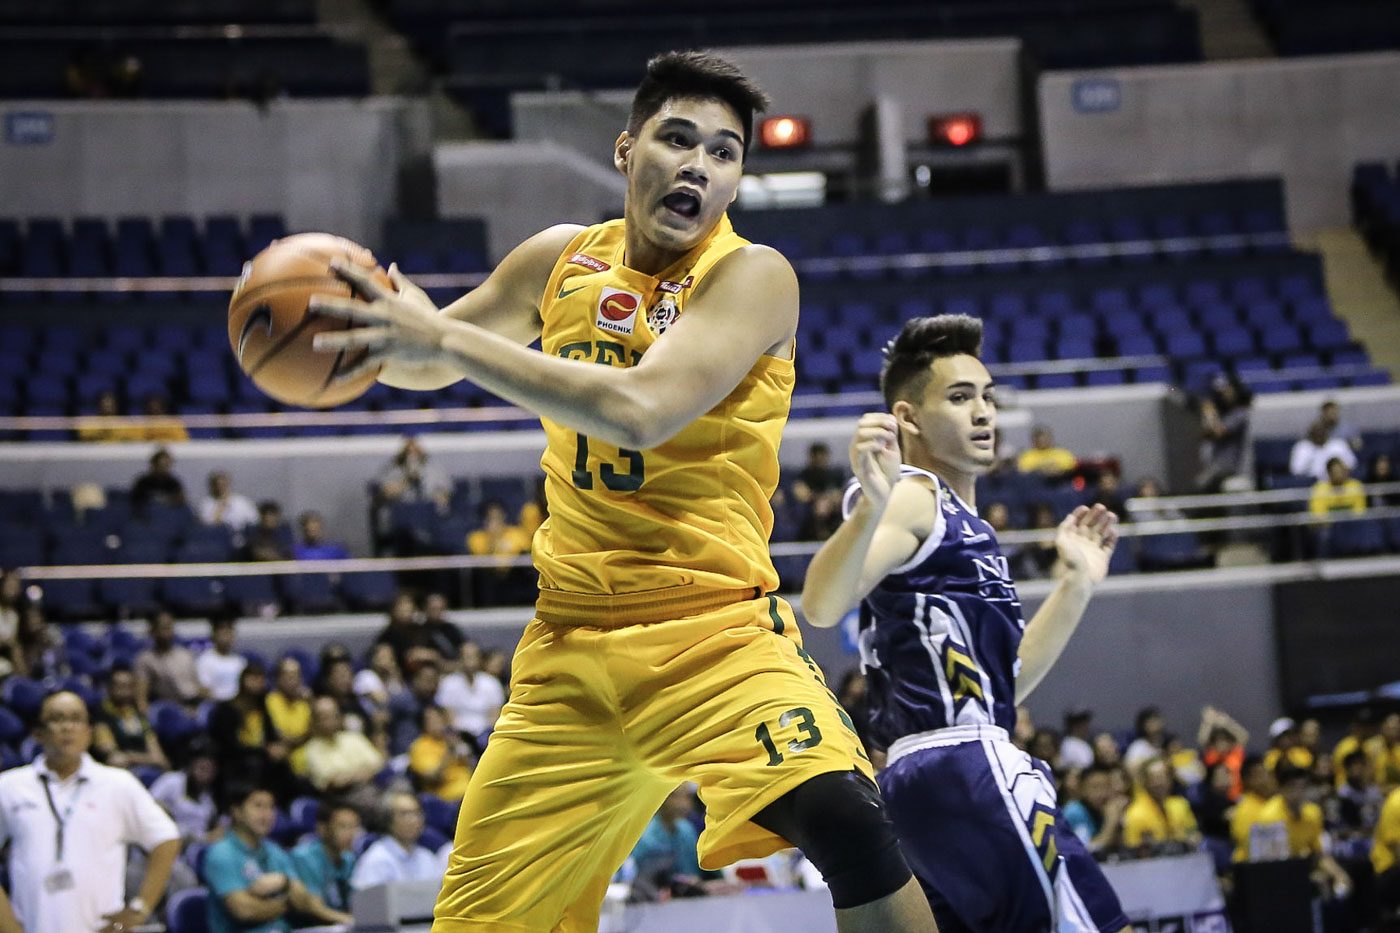 Tolentino leads Tamaraws to their second straight win